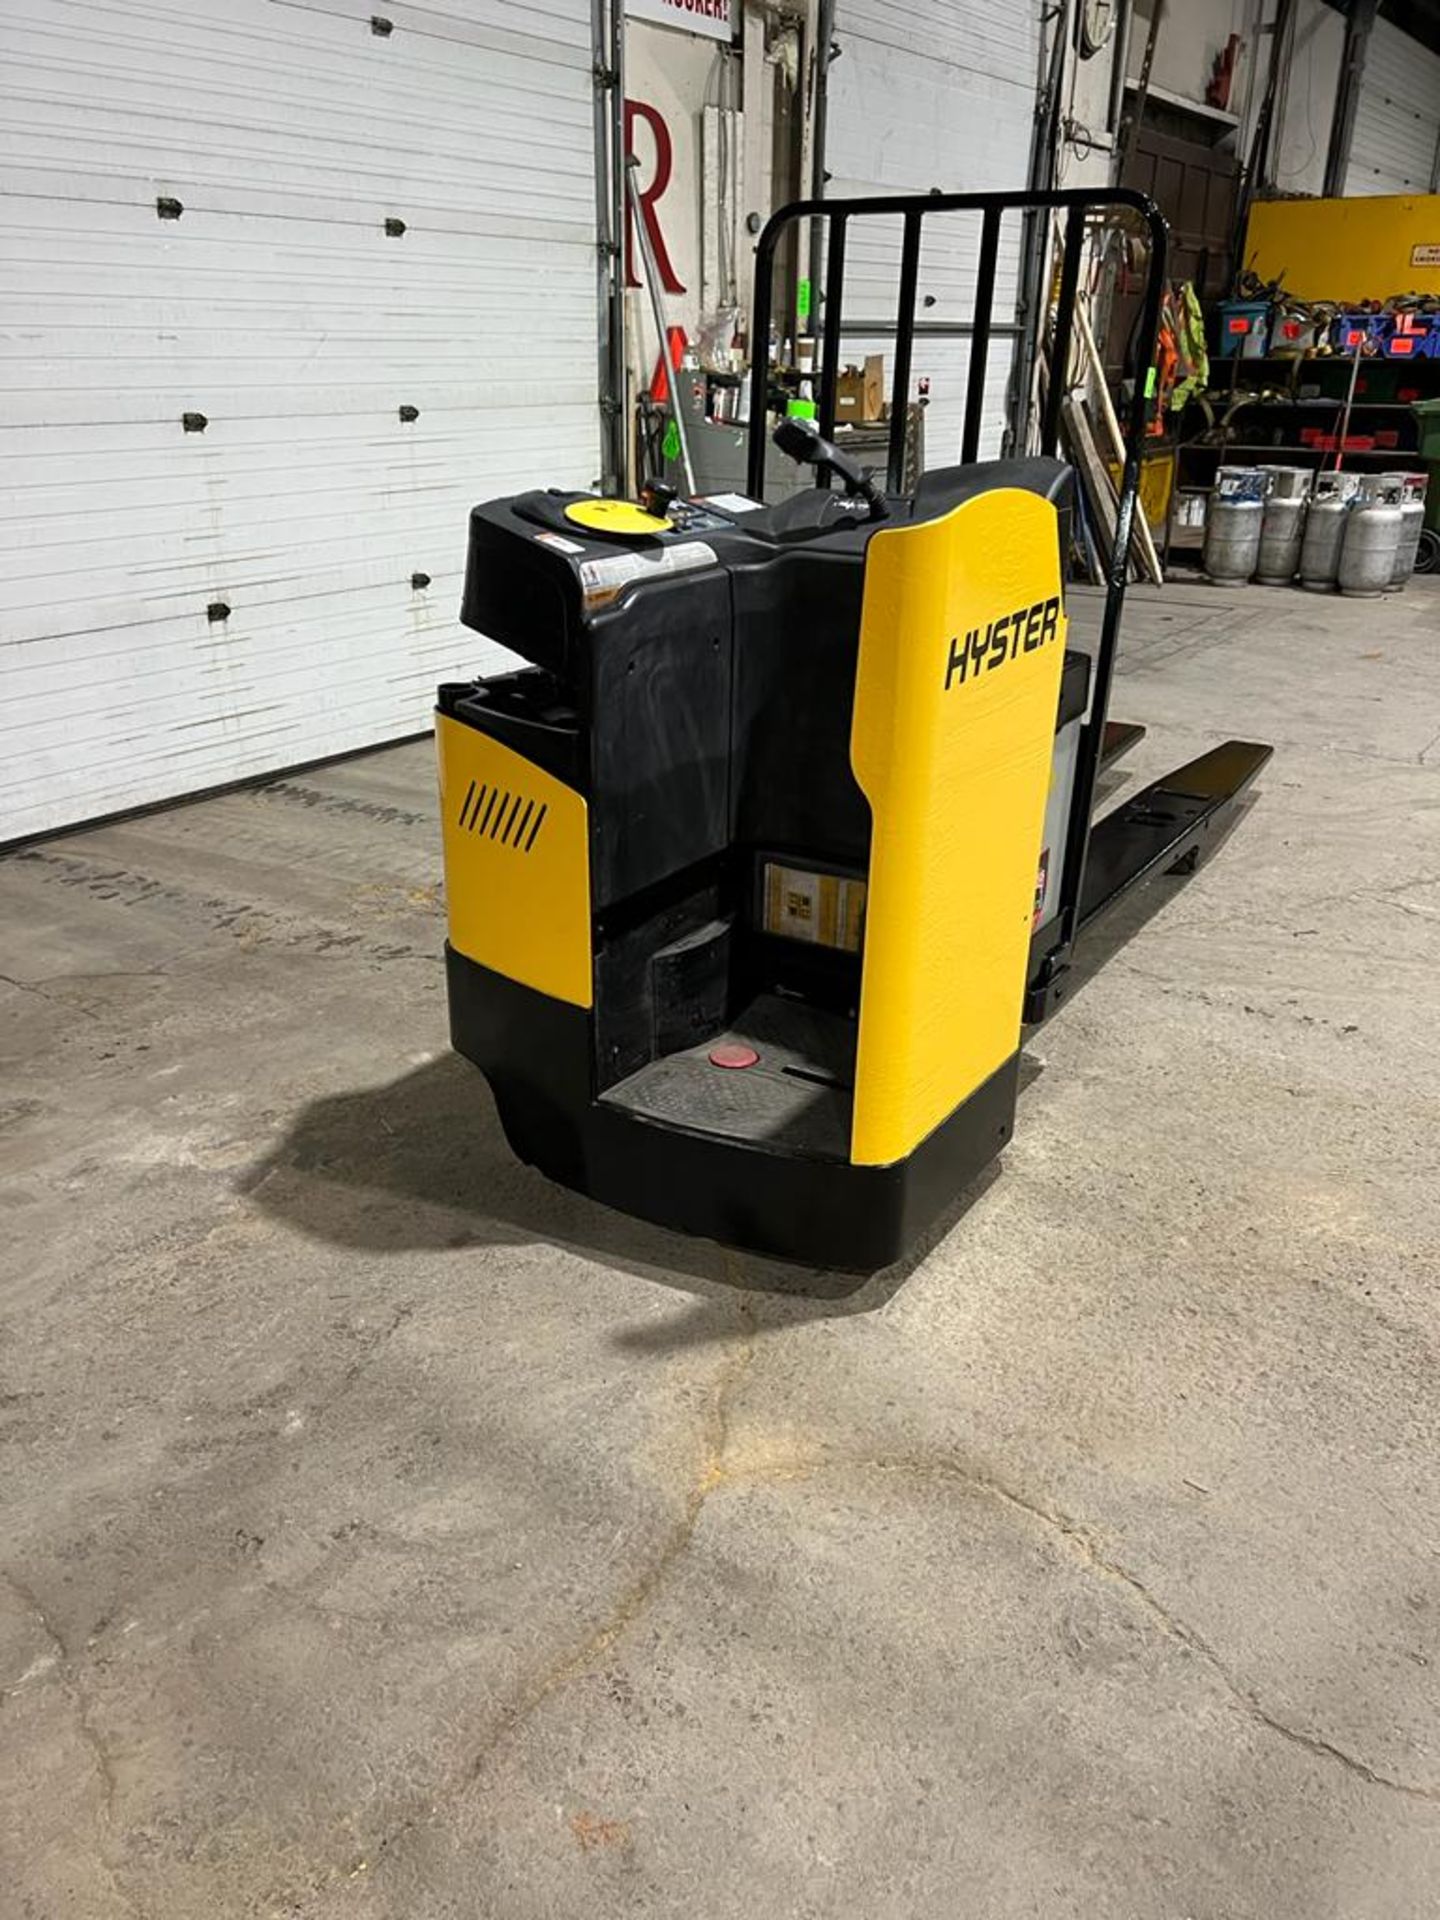 NICE 2015 Hyster Ride-On END RIDER Powered Pallet Truck 8' Long Forks 8000lbs capacity Safety to - Image 3 of 3